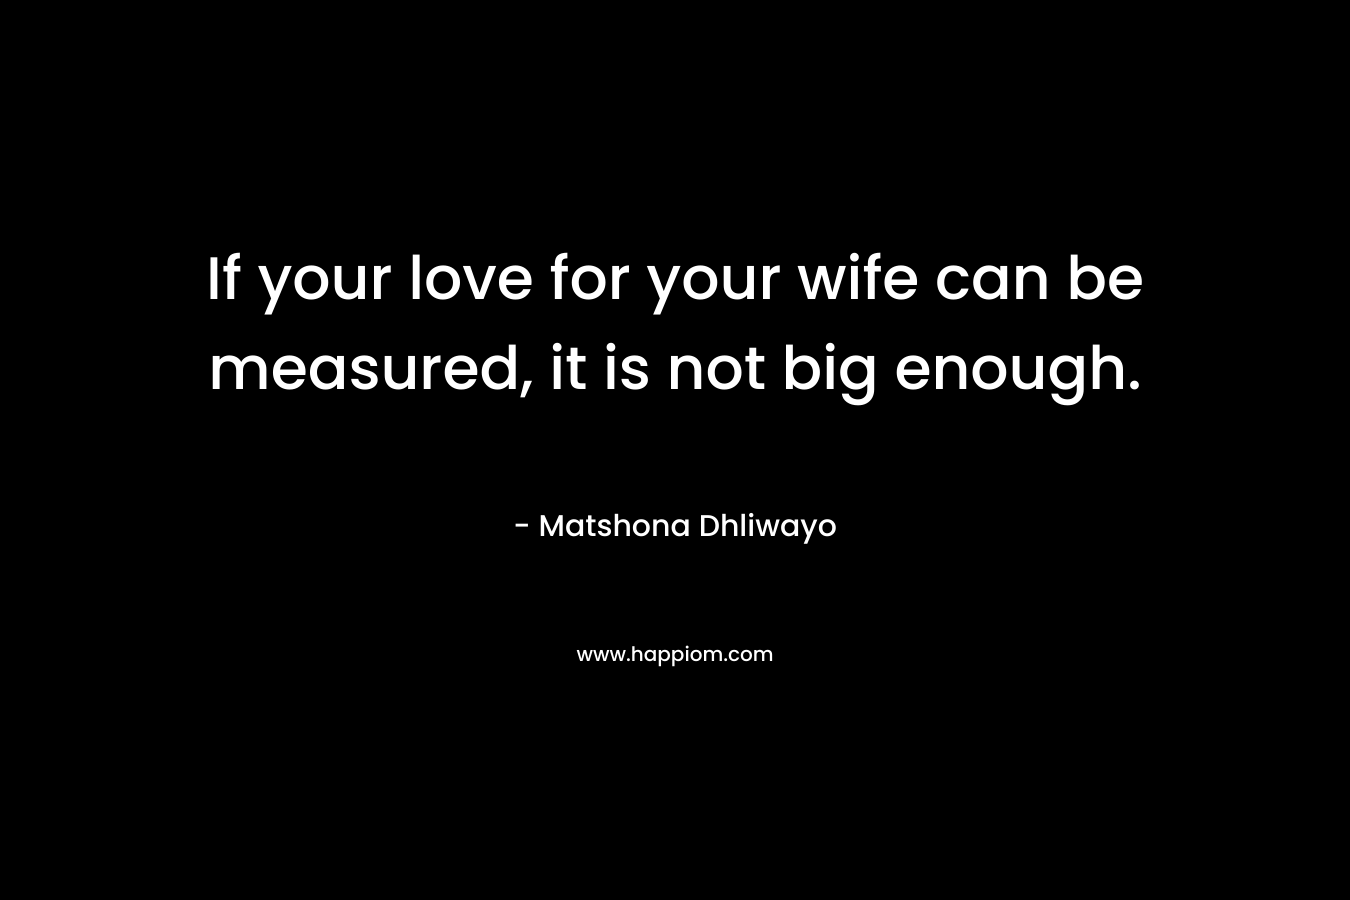 If your love for your wife can be measured, it is not big enough. – Matshona Dhliwayo